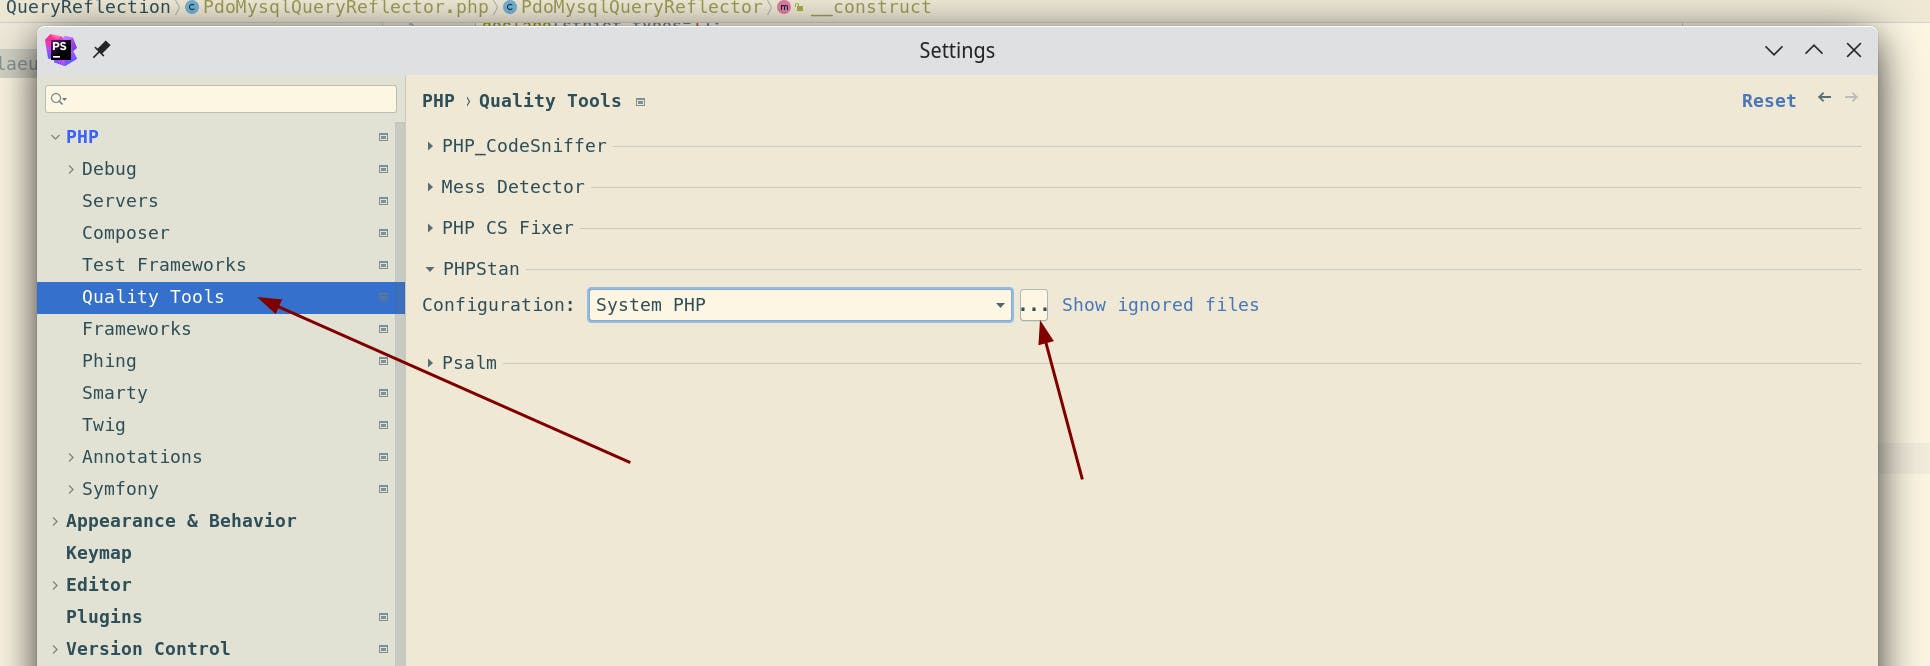 Create a new configuration for PHPStan in Quality Tools settings.